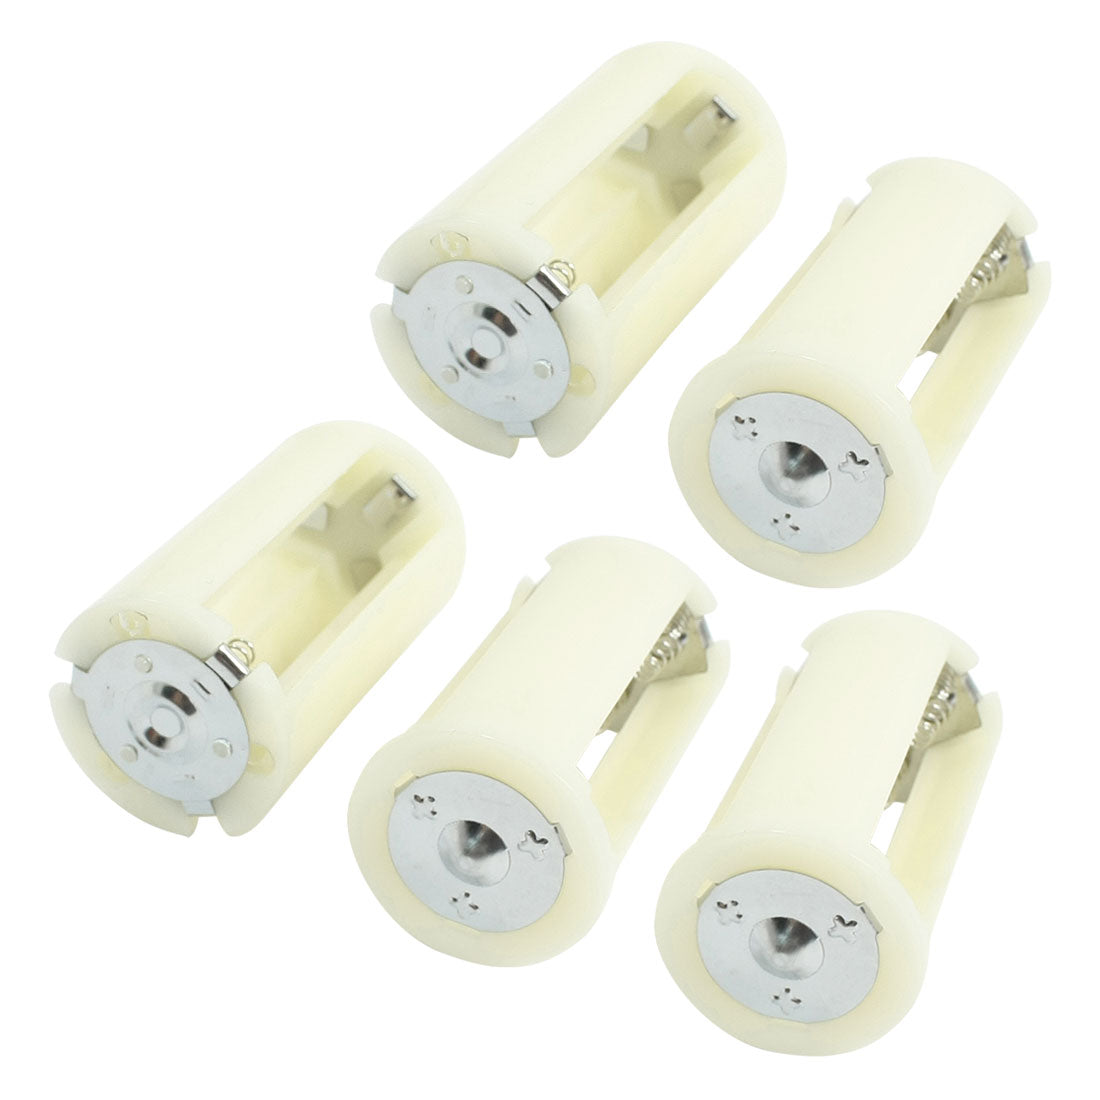 uxcell Uxcell 5 Pcs Parallel Connection 3x 1.5V AA Battery Holder Case Box Container White